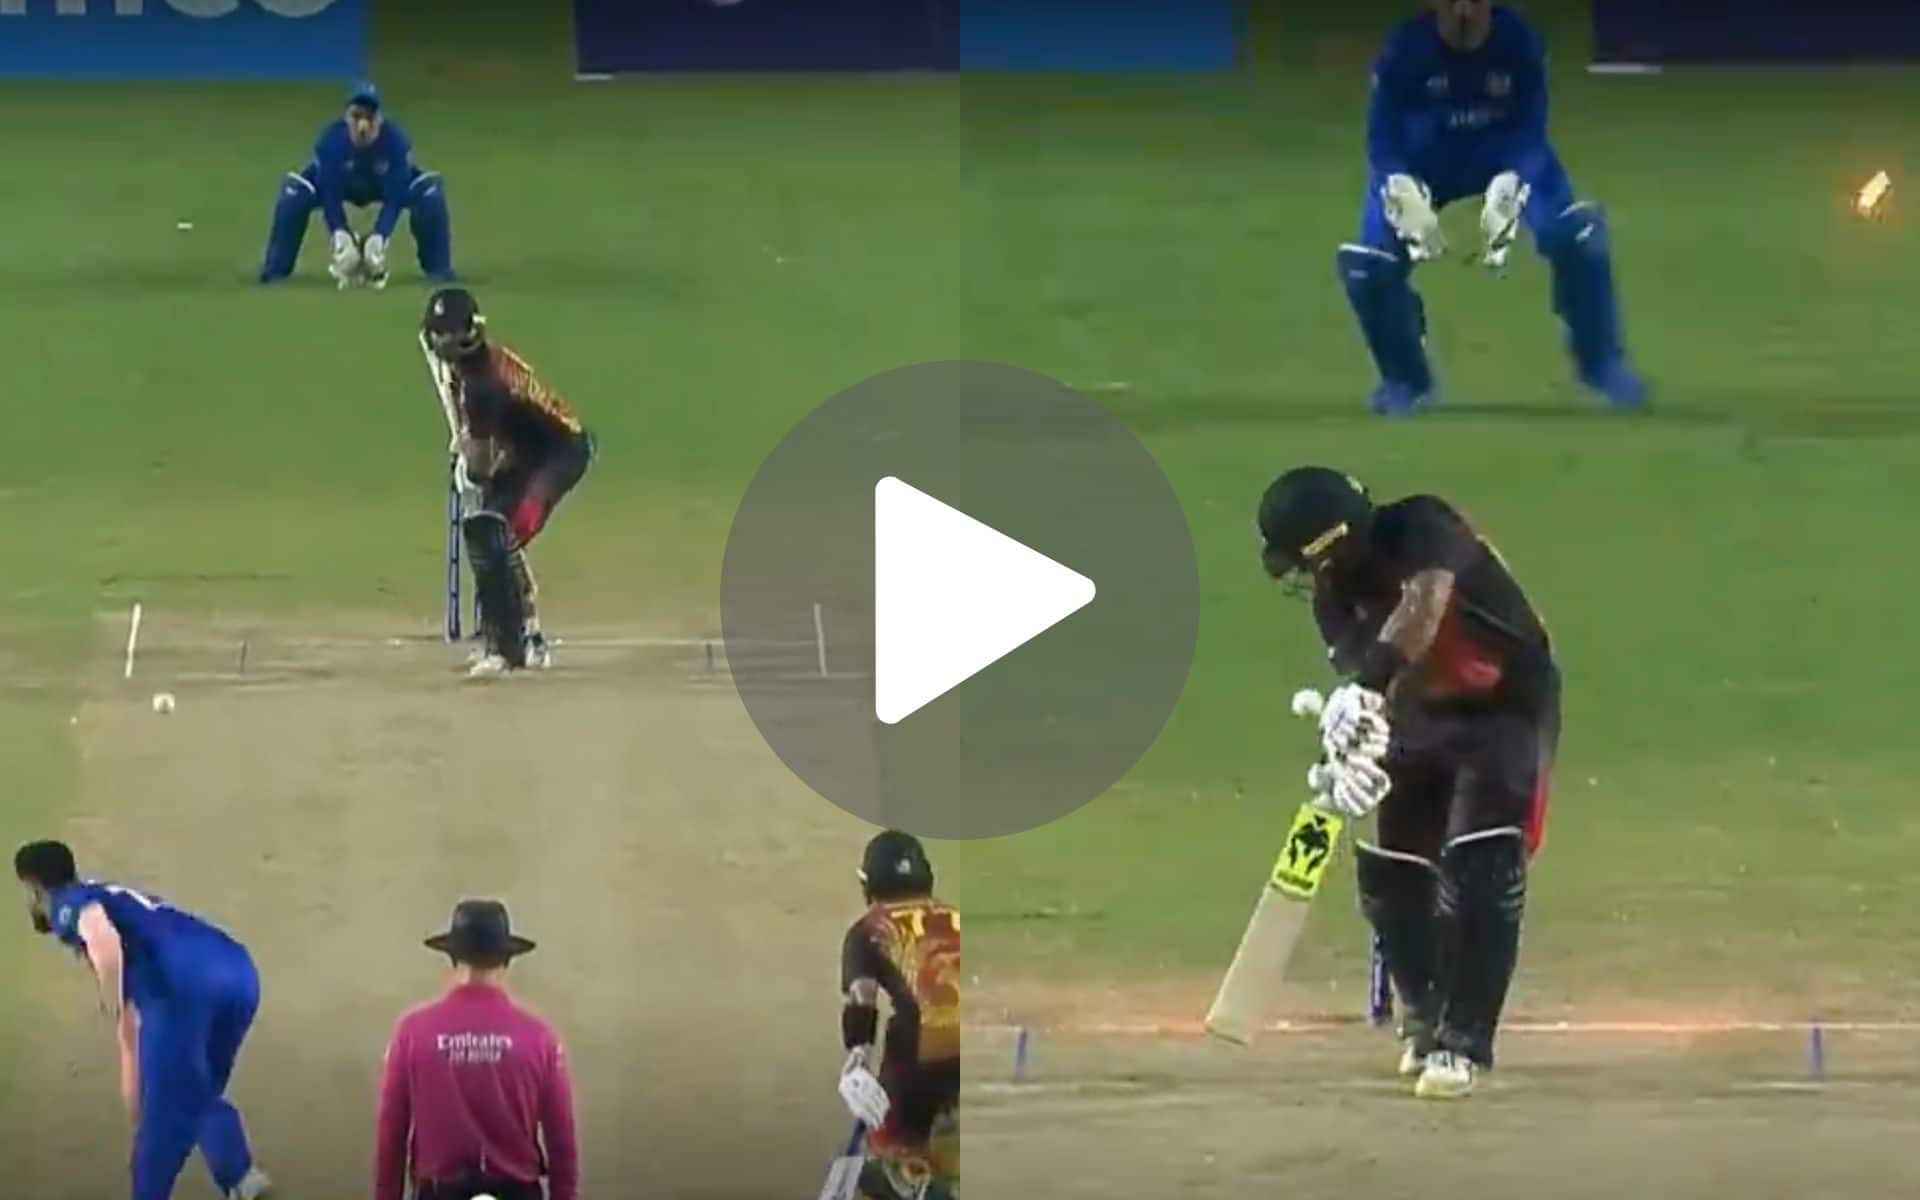 [Watch] Naveen Reminds Of Bumrah As He Cleans Up Ura To Claim His 50th T20I Wicket